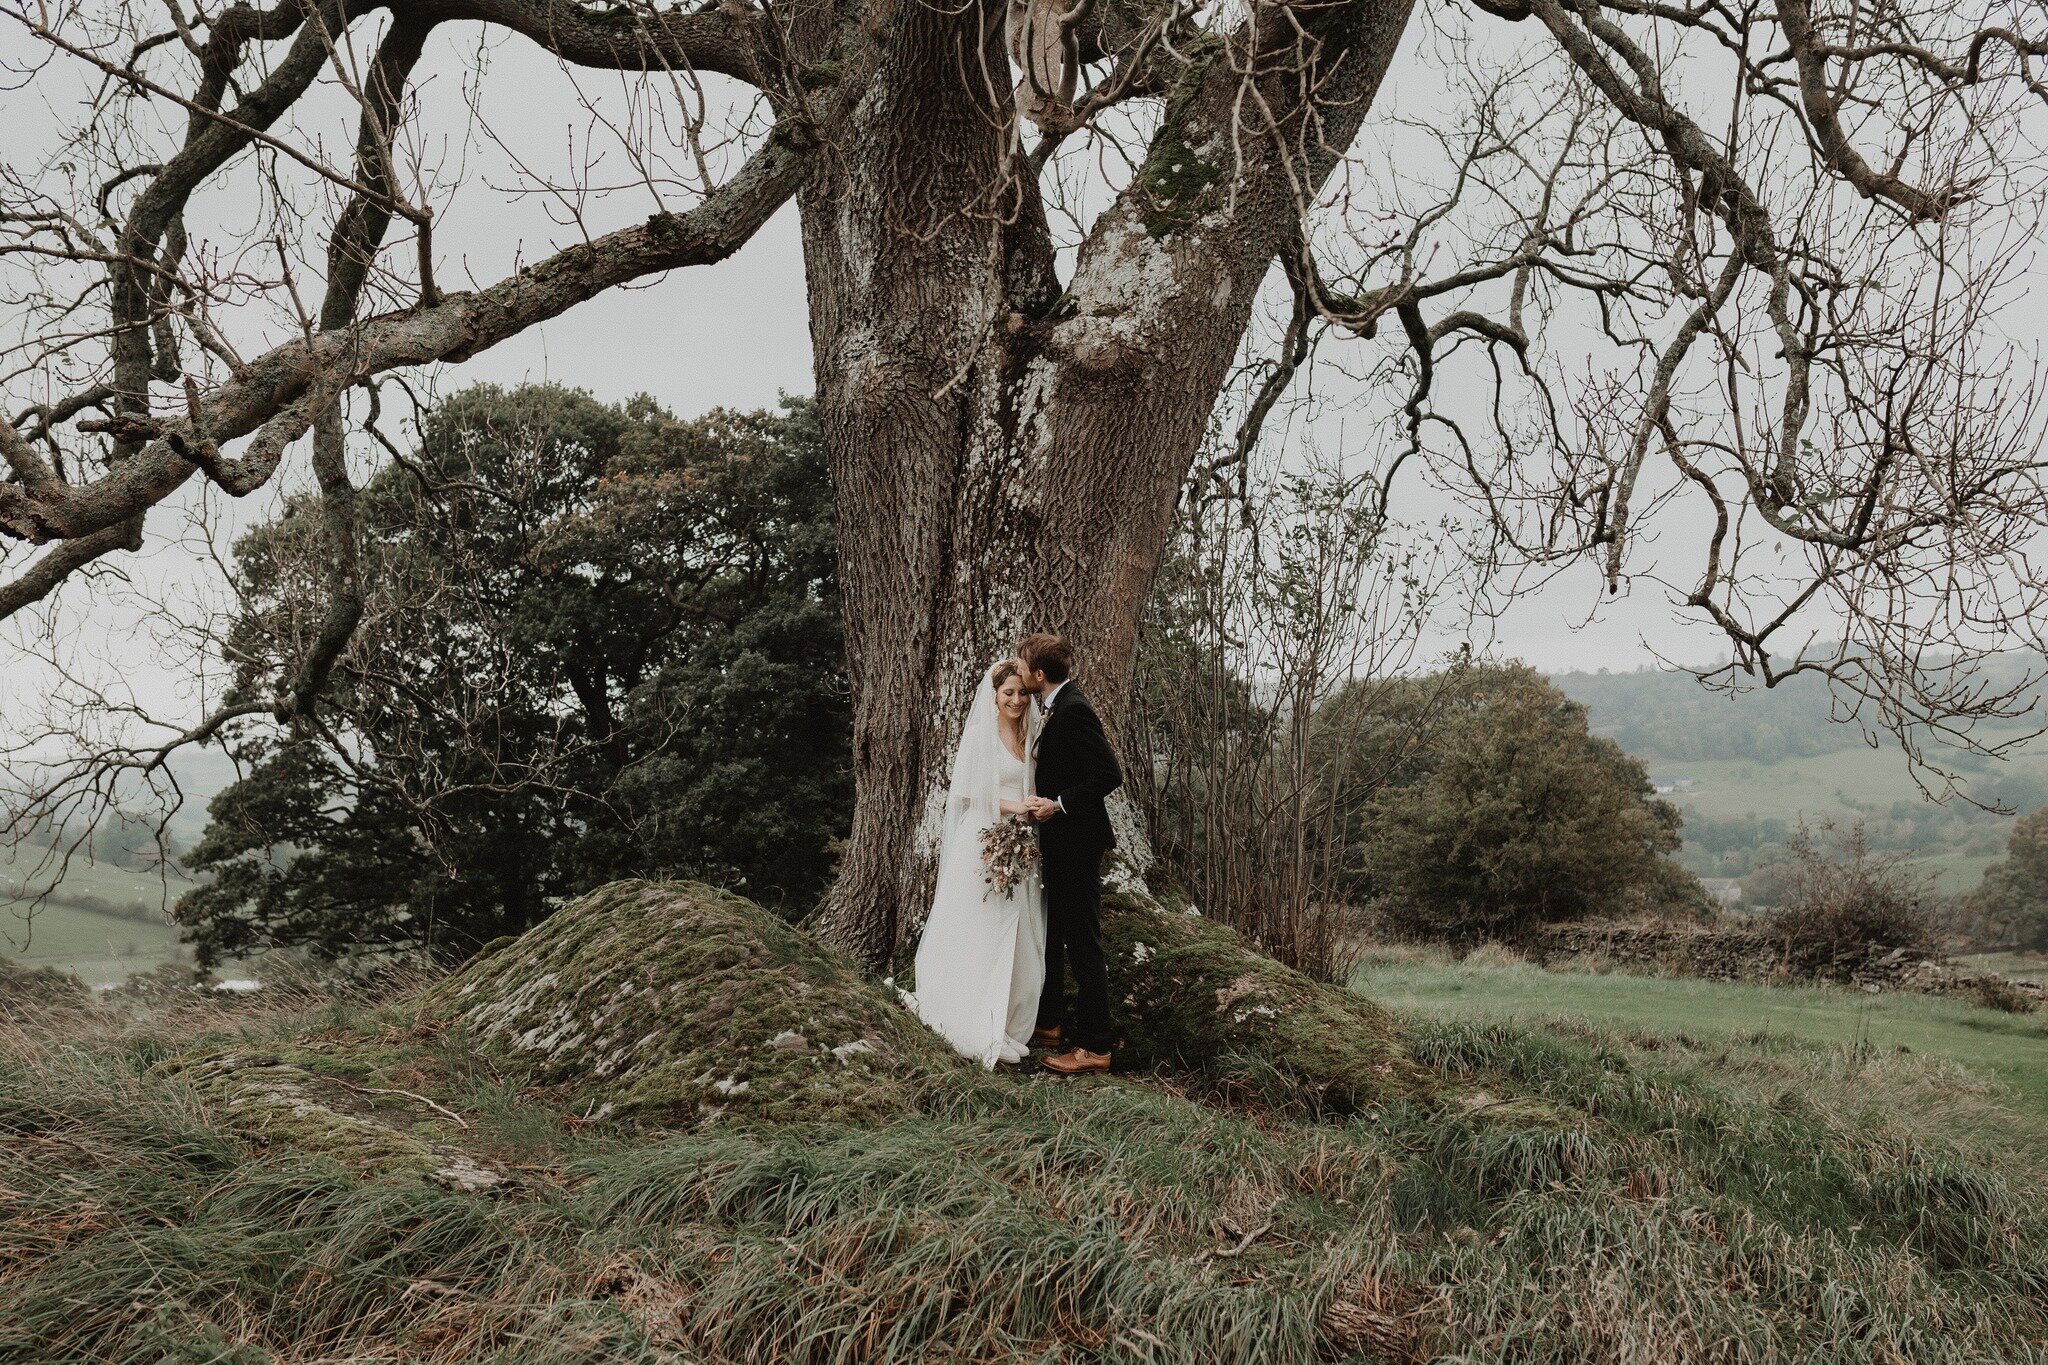 &quot;Love is like a tree; it grows of its own accord, it puts down deep roots into our whole being.&quot; - Victor Hugo

This weekend was special as Becky + Mike tied the knot in the beautiful Lake District.

Surrounded by their incredible families 